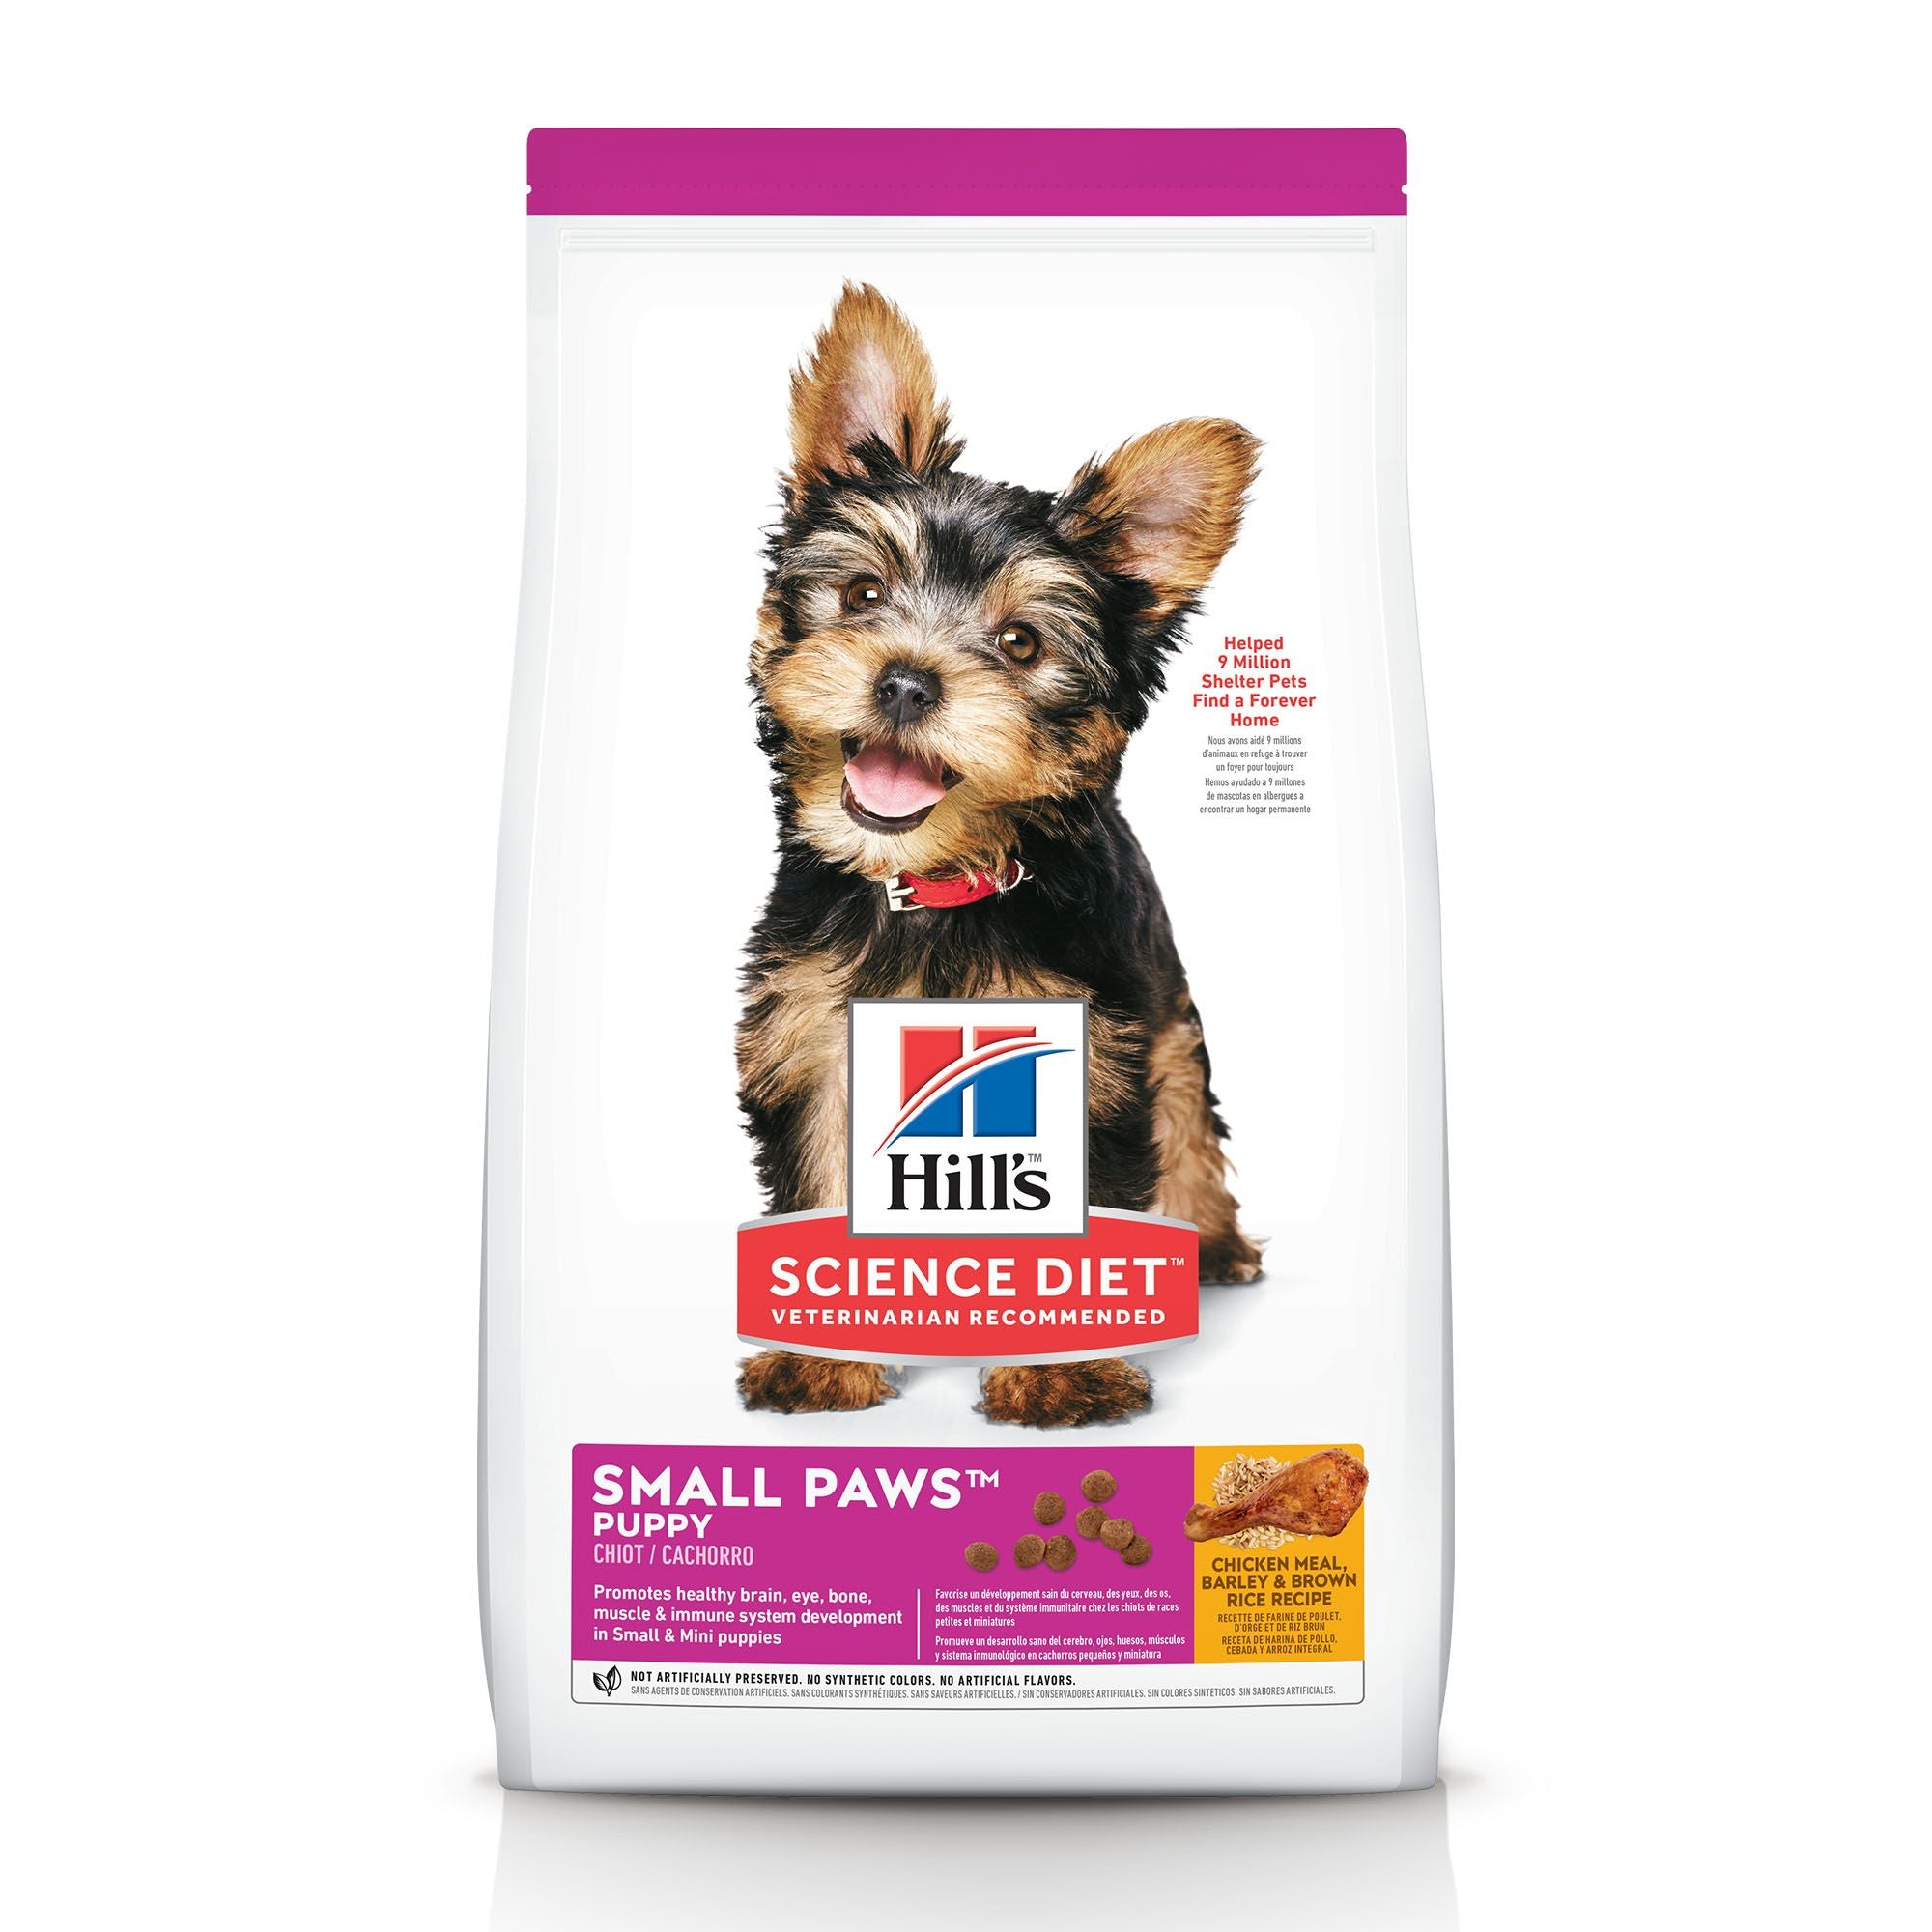 Hill's Science Diet Puppy Small Paws Dry Dog Food, Chicken Meal